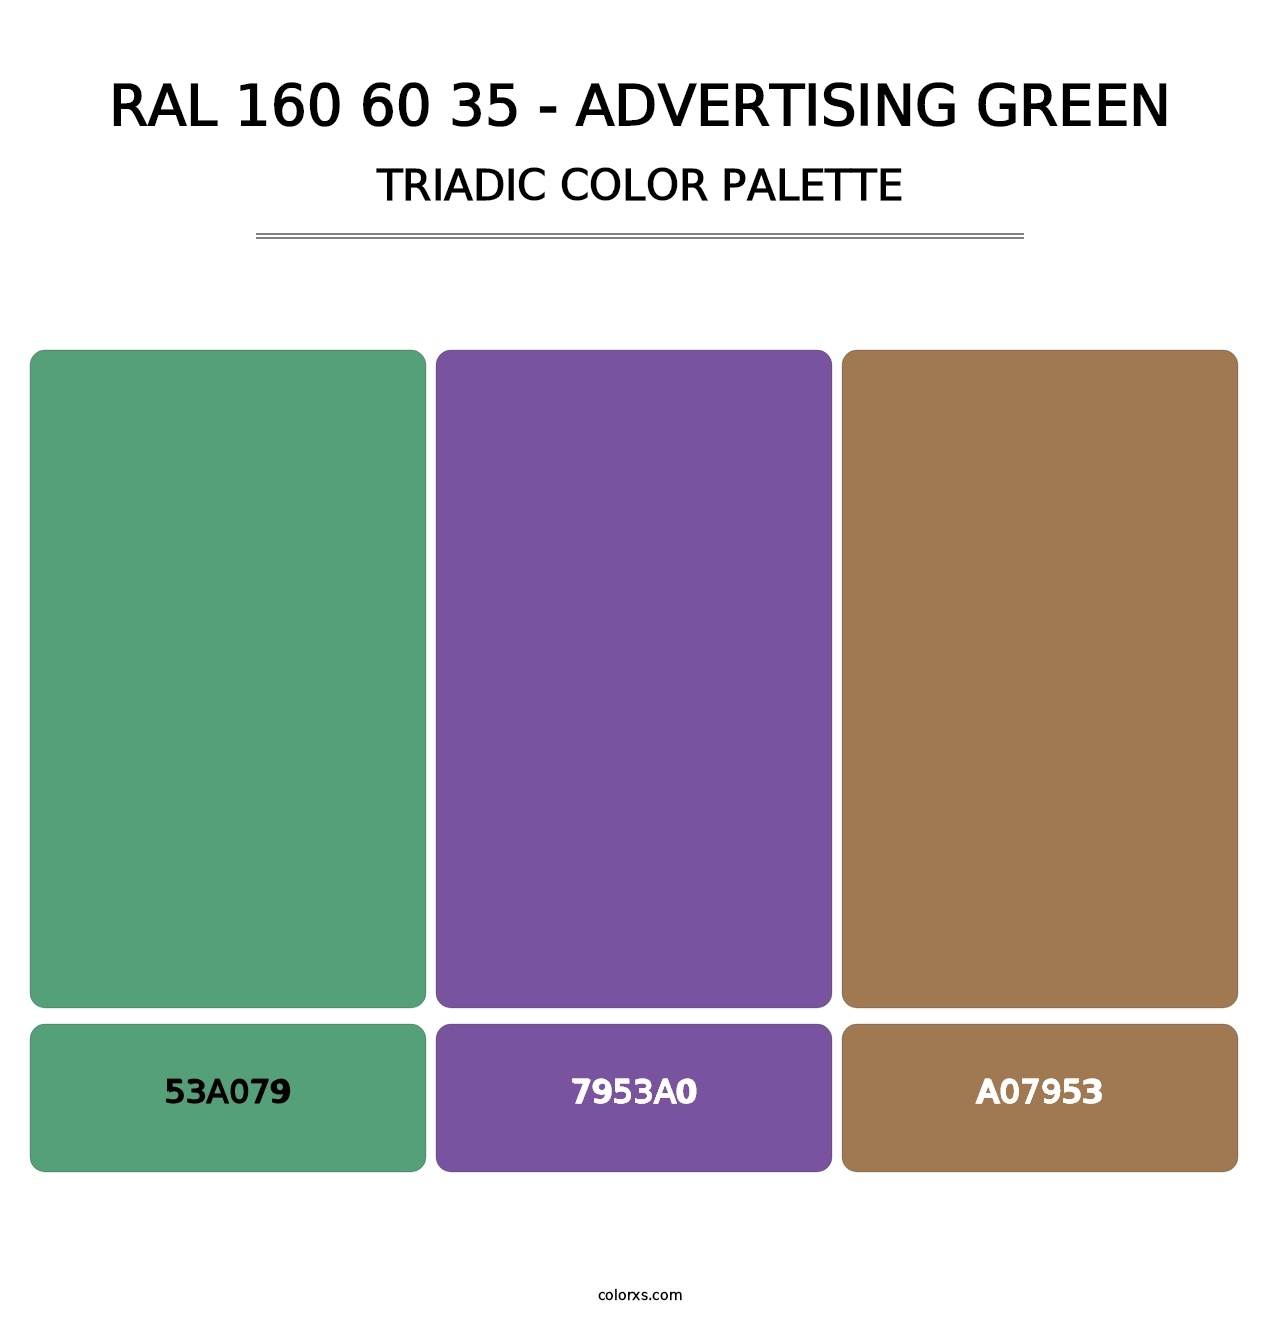 RAL 160 60 35 - Advertising Green - Triadic Color Palette